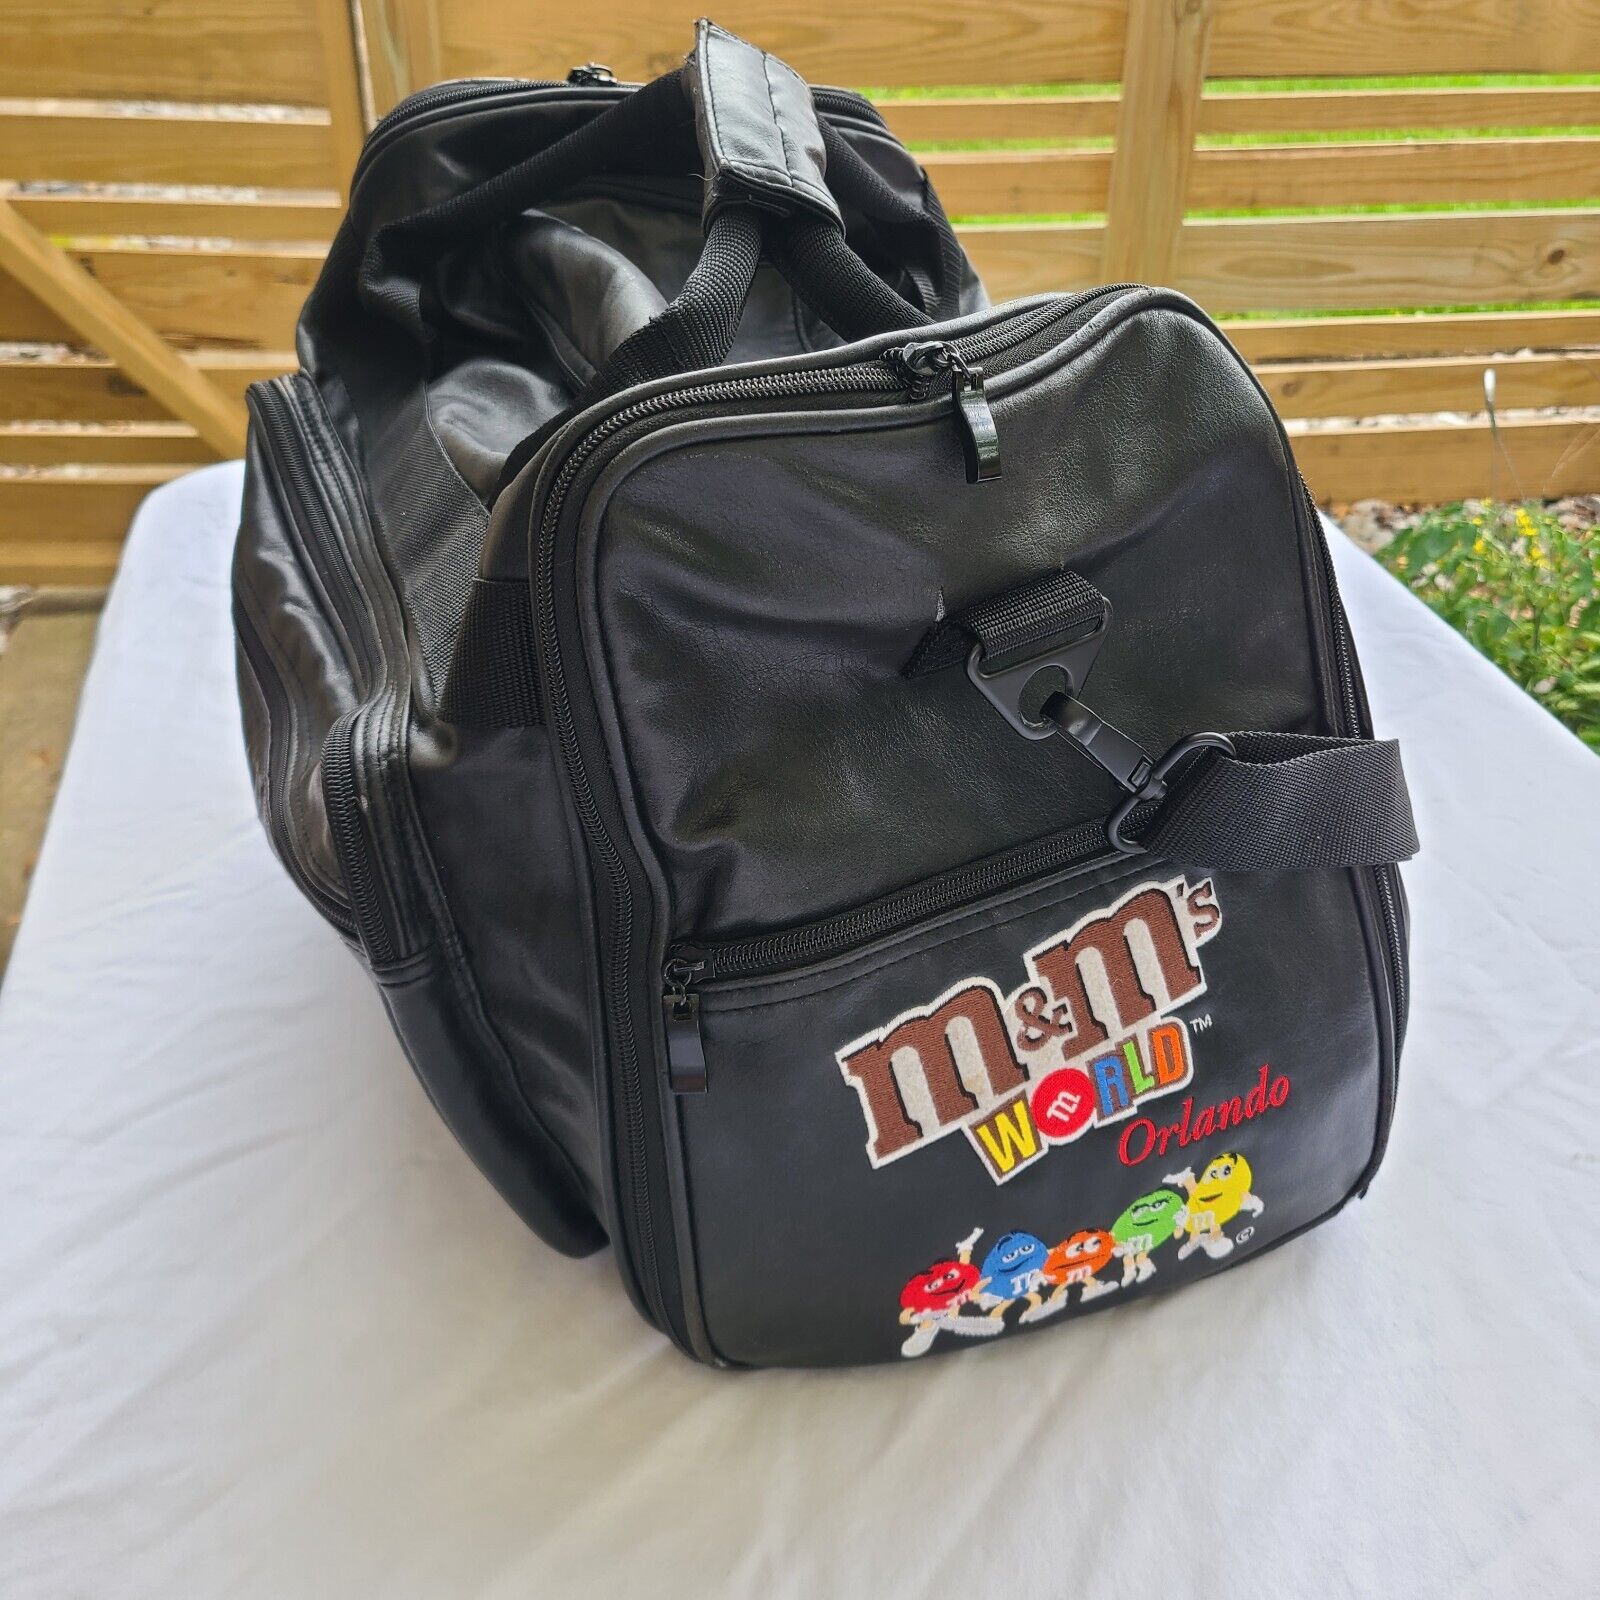 M&M\'s Candy World Orlando Black Leather Duffle Bag Travel Carry On Luggage